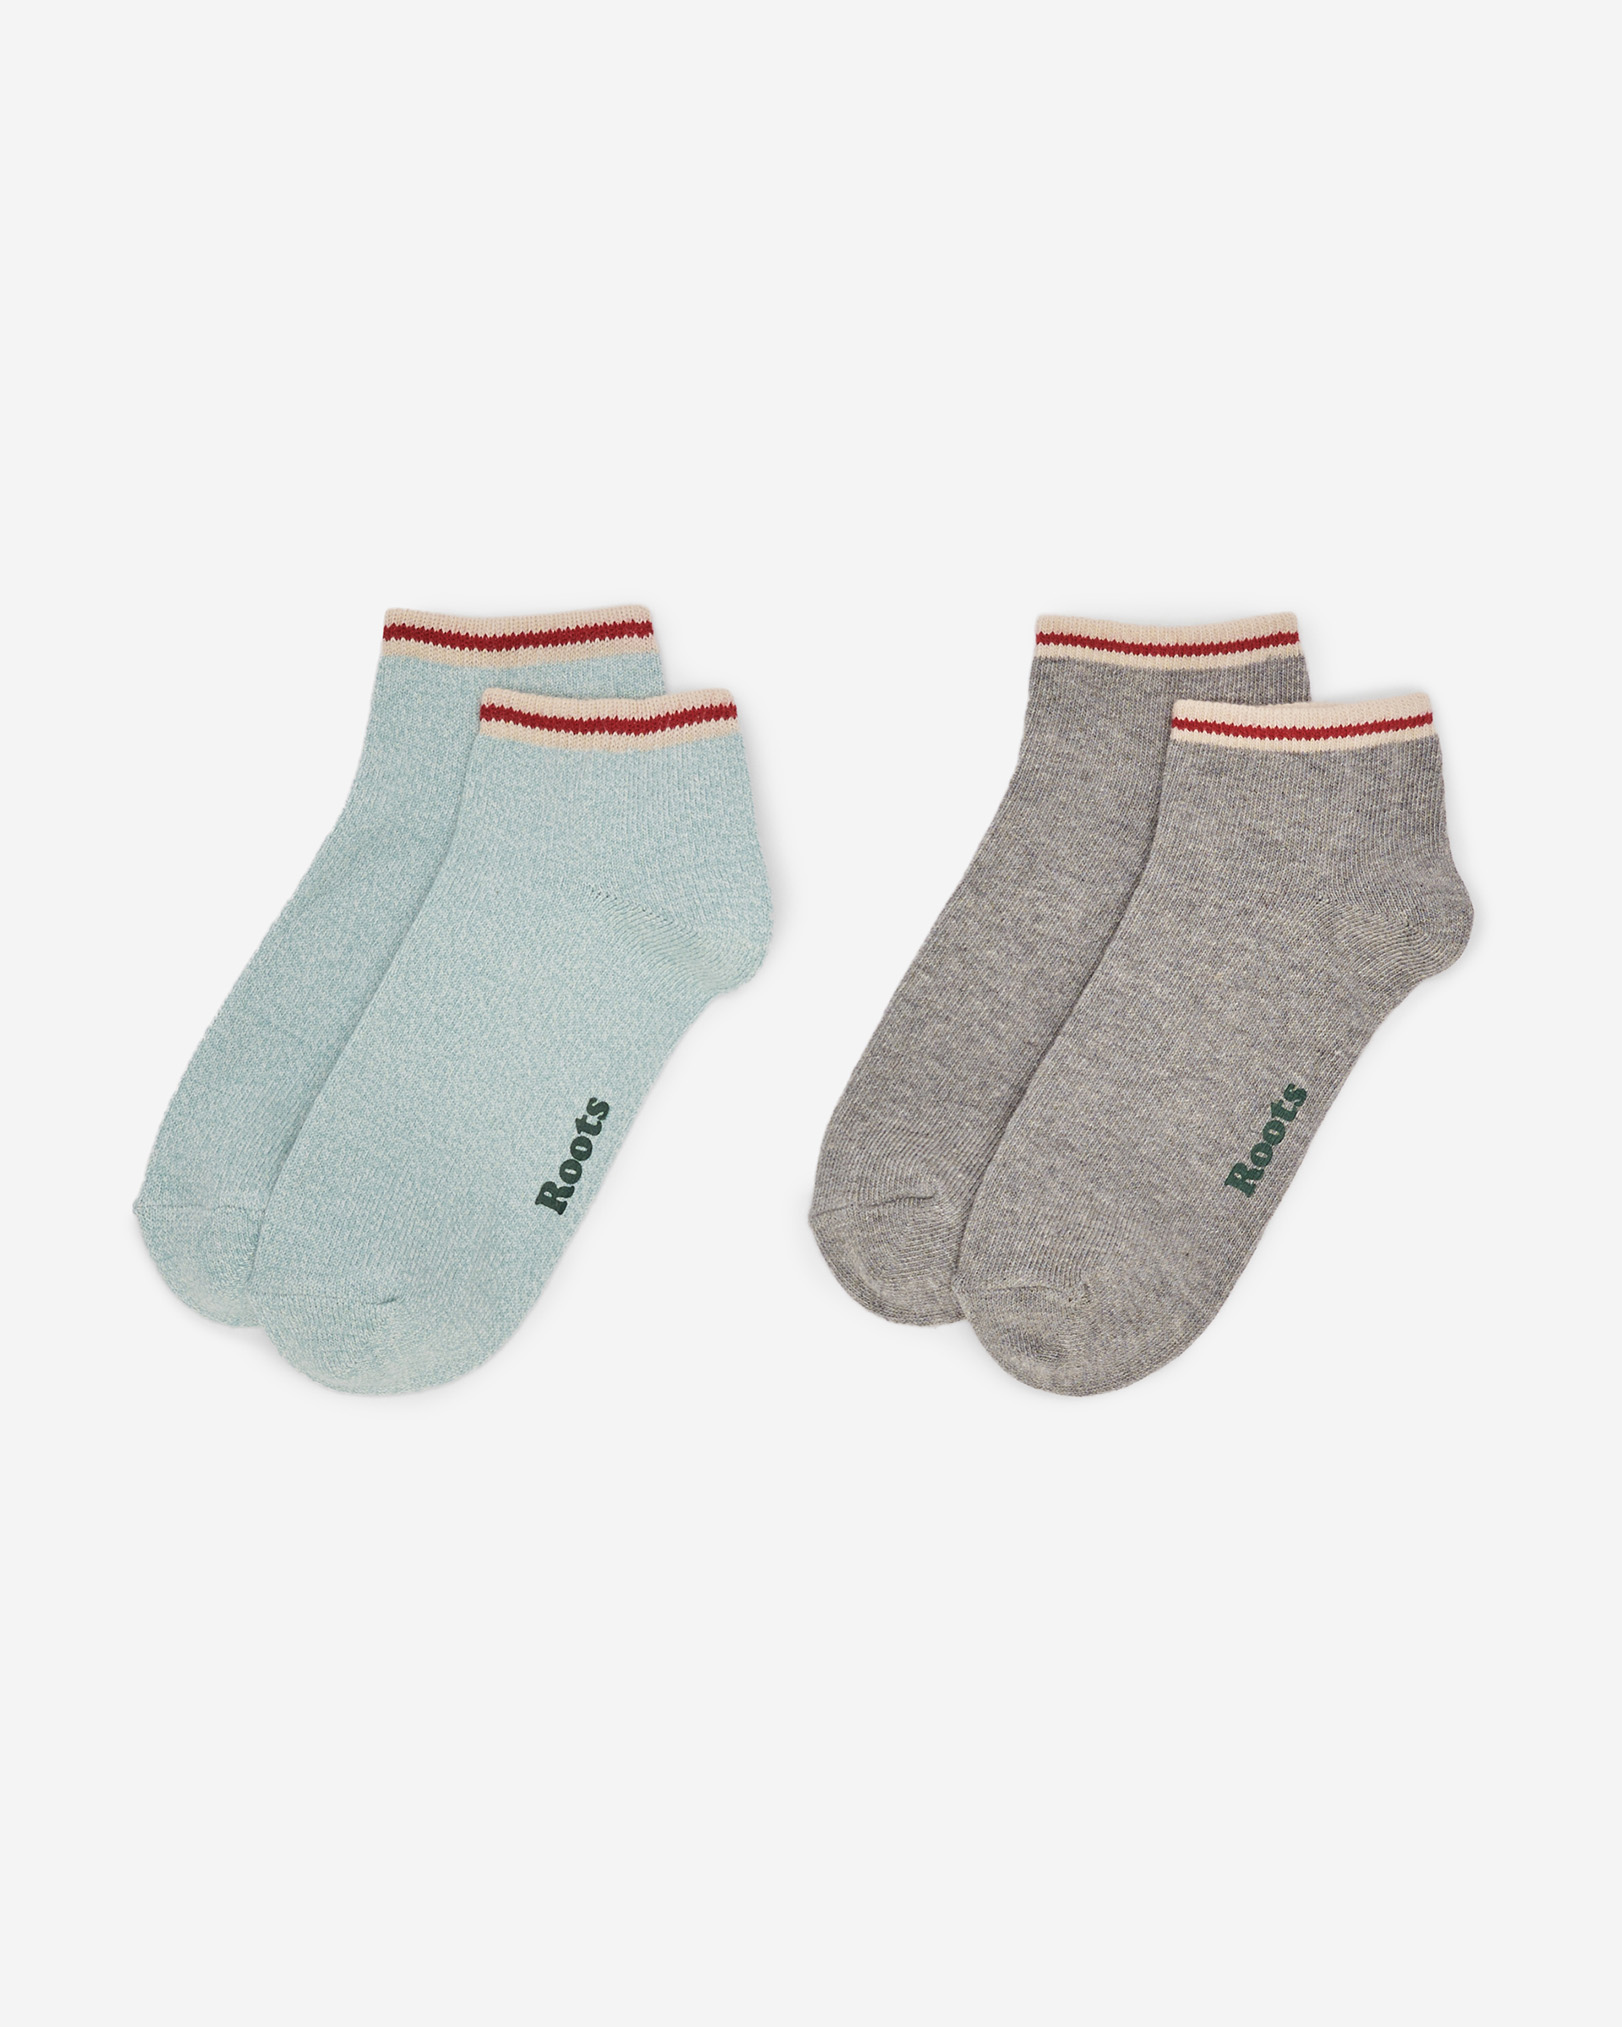 Roots Adult Cotton Cabin Ped Sock 2 Pack in Aqua Grey